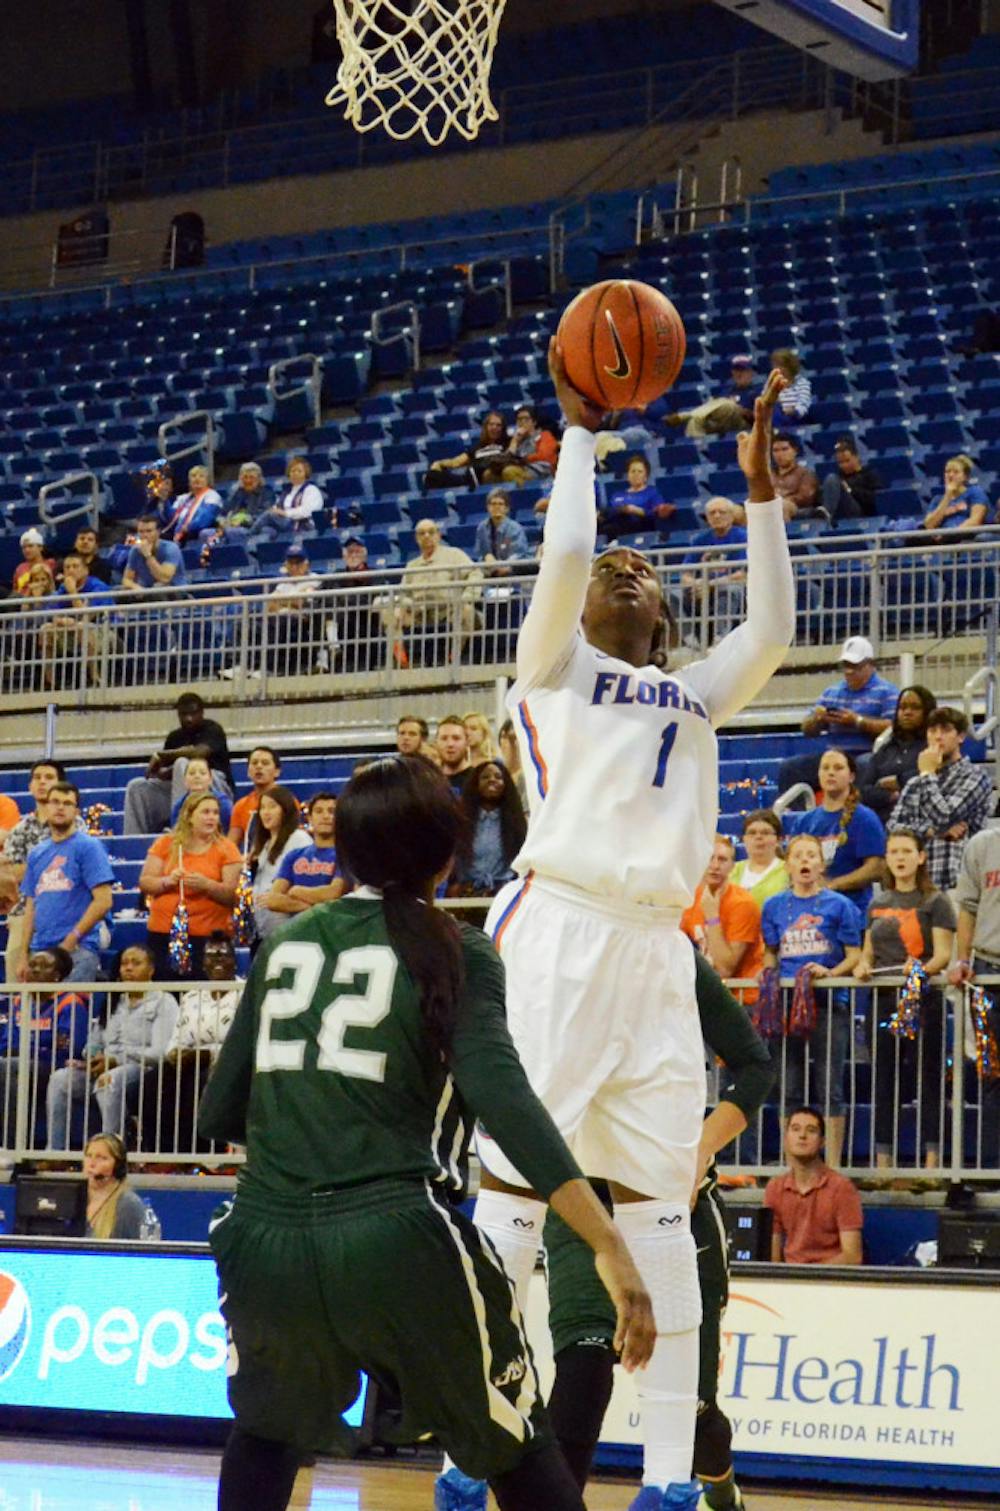 <p>Ronni Williams goes up for a layup during Florida's 84-73 win against Jacksonville on Nov. 14 in the O'Connell Center</p>